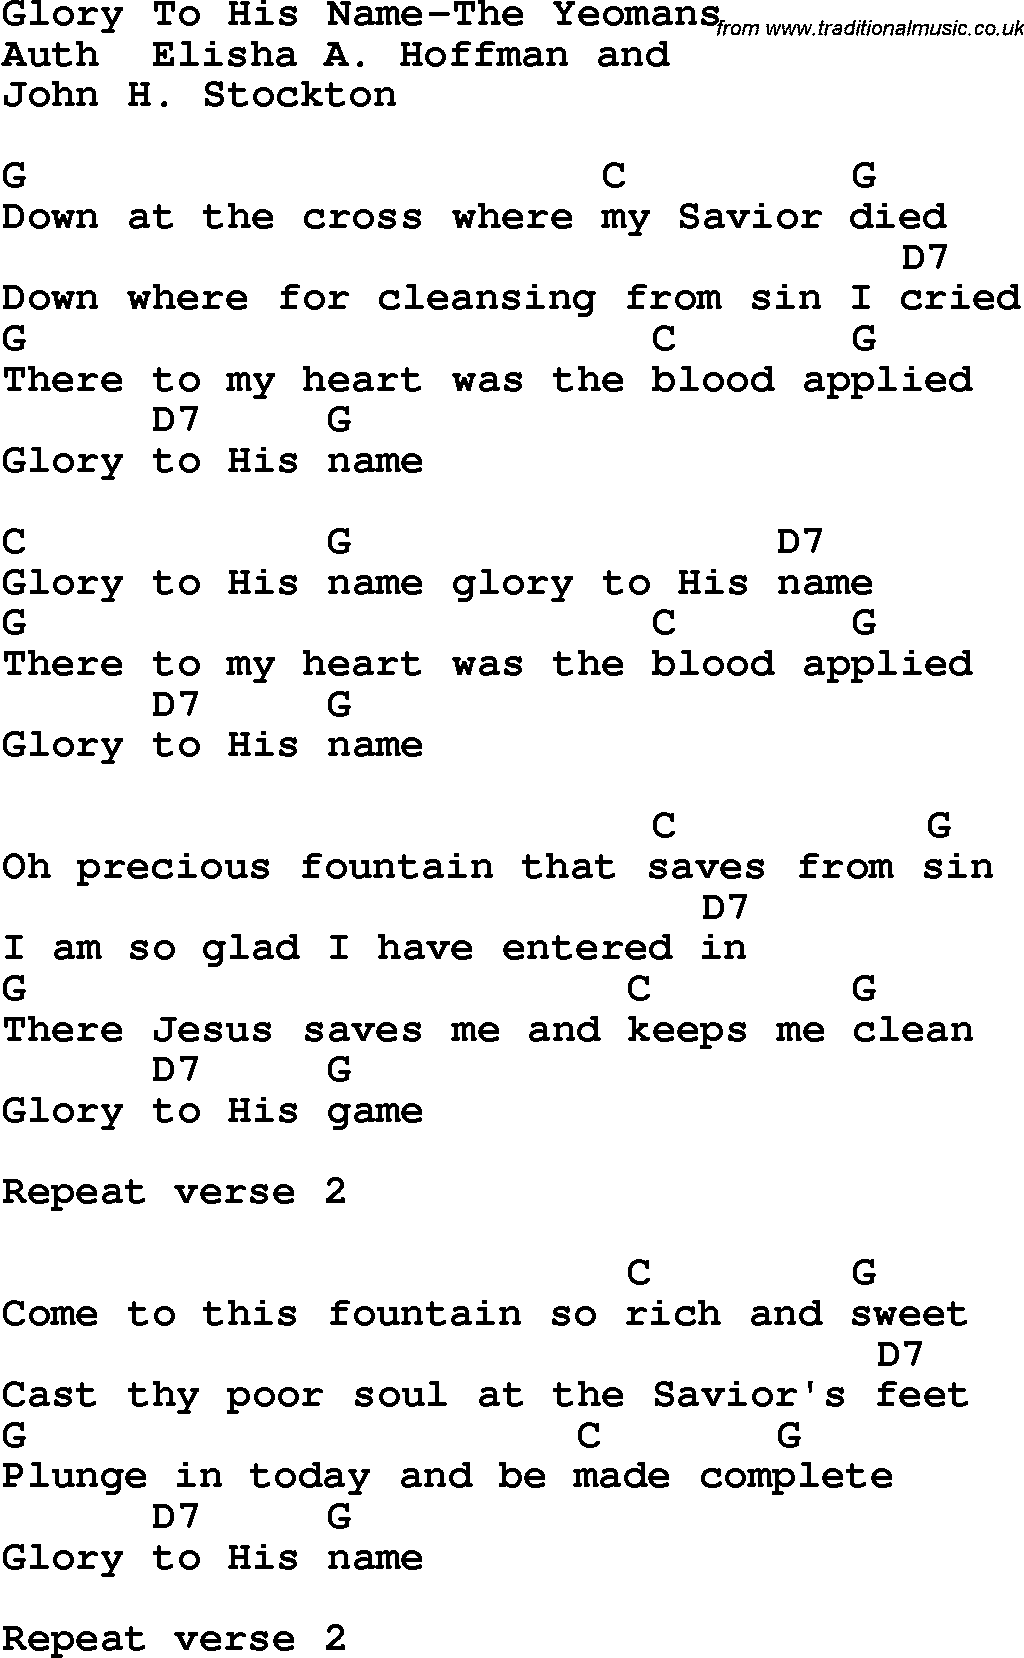 Country, Southern and Bluegrass Gospel Song Glory To His Name-The Yeomans lyrics and chords